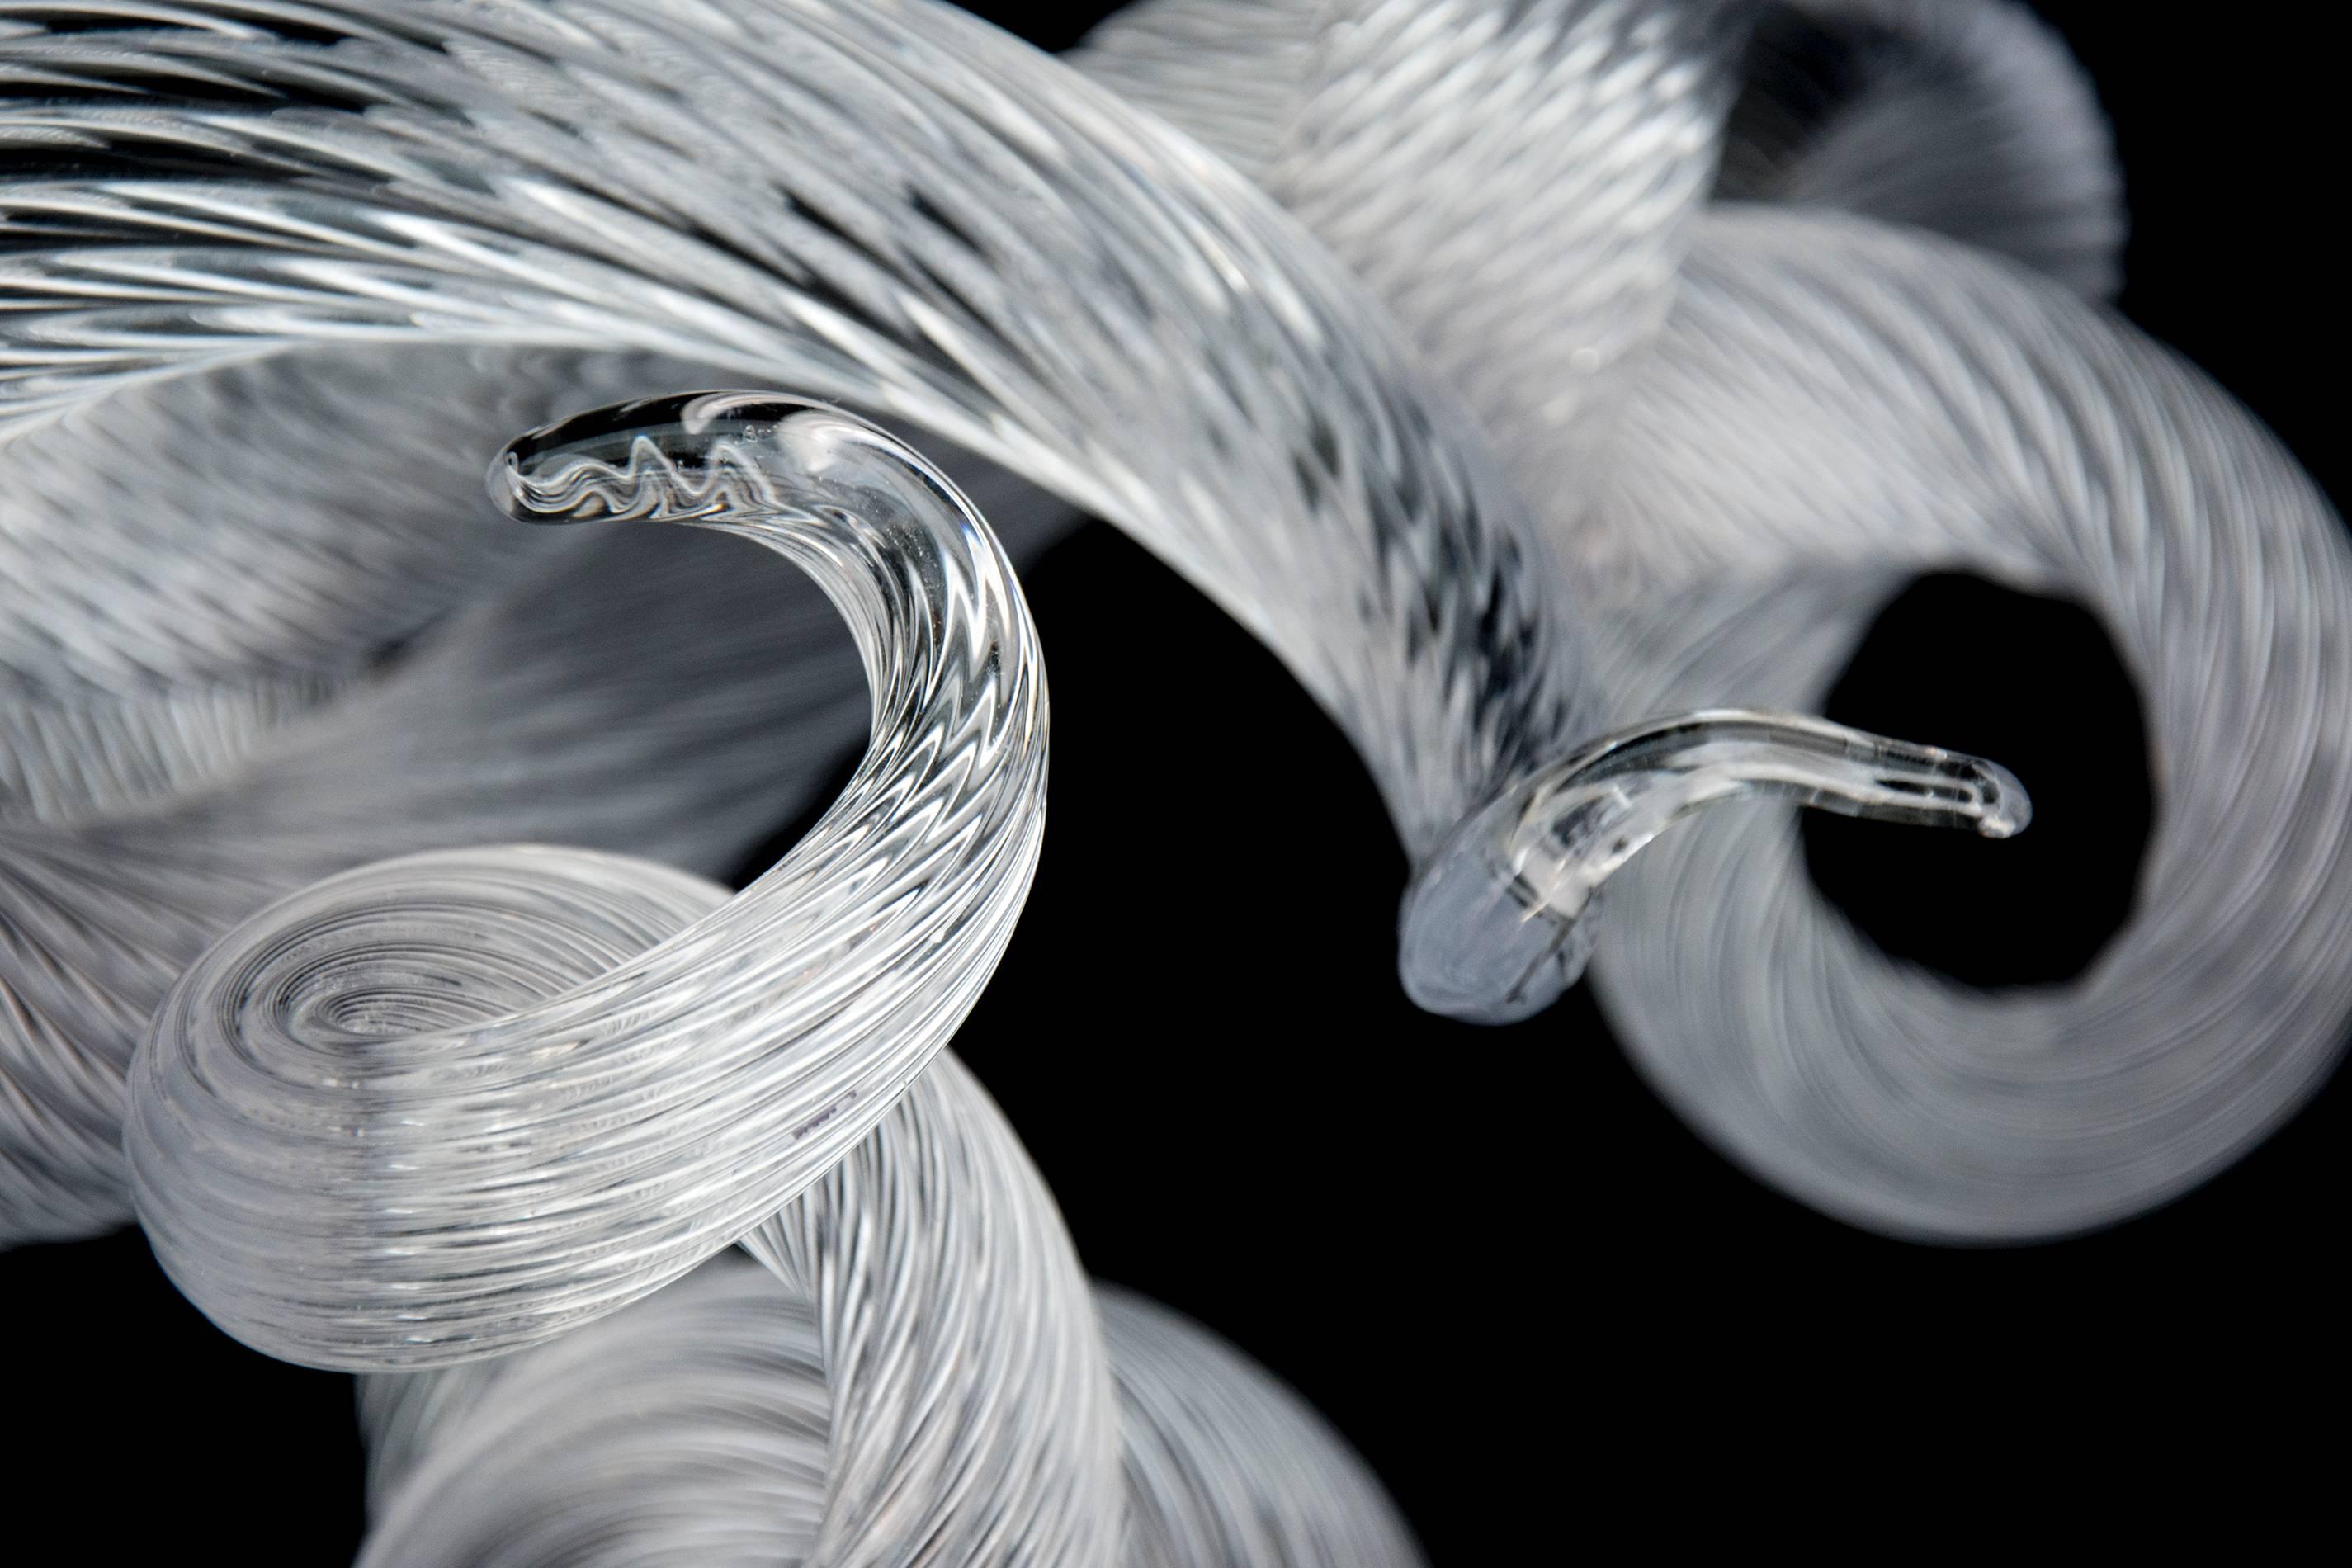 Lengths of striated clear glass are twirled and looped into playful yet elegant breaking waves by master glass artist John Paul Robinson. This dynamic work that consists of three intersecting glass sections is the first in a series of Surf